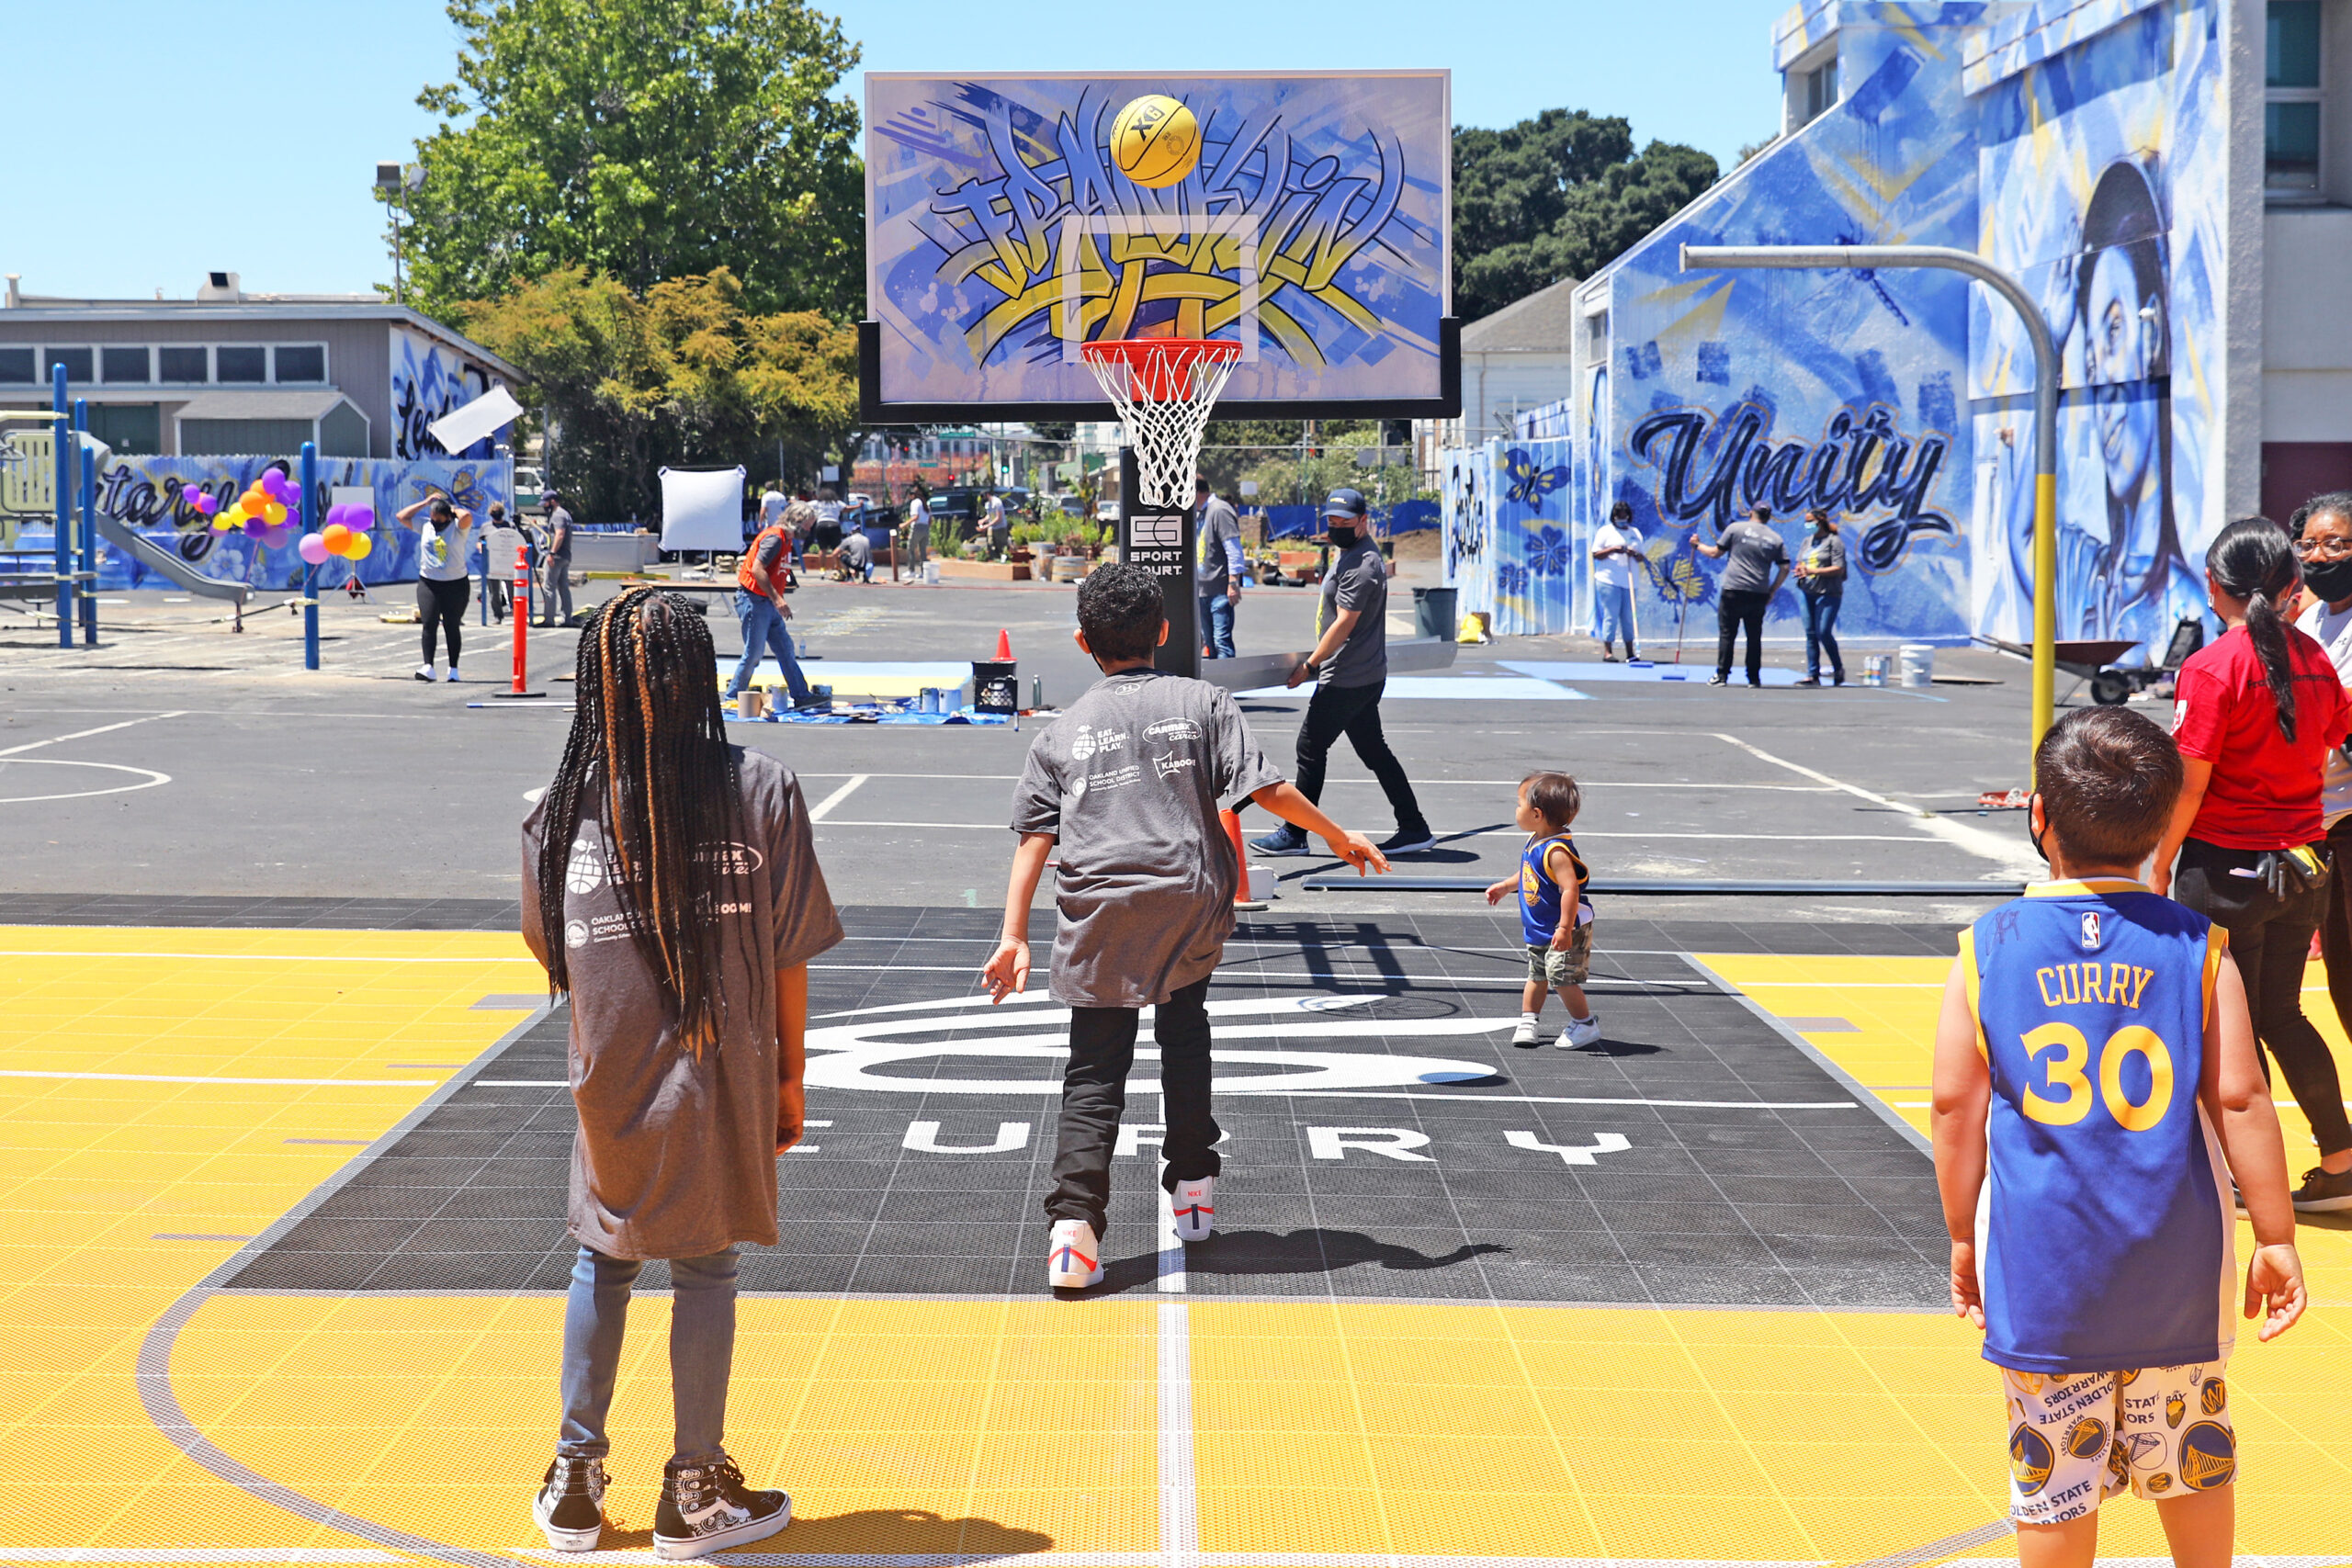 Stephen And Ayesha Curry's Eat. Learn. Play., Along With Partners KABOOM!, The CarMax Foundation, And Oakland Unified School District, Unveiled An Amazing New Playground, Multi-Sport Court, And Garden At Franklin Elementary School On Saturday, June 12